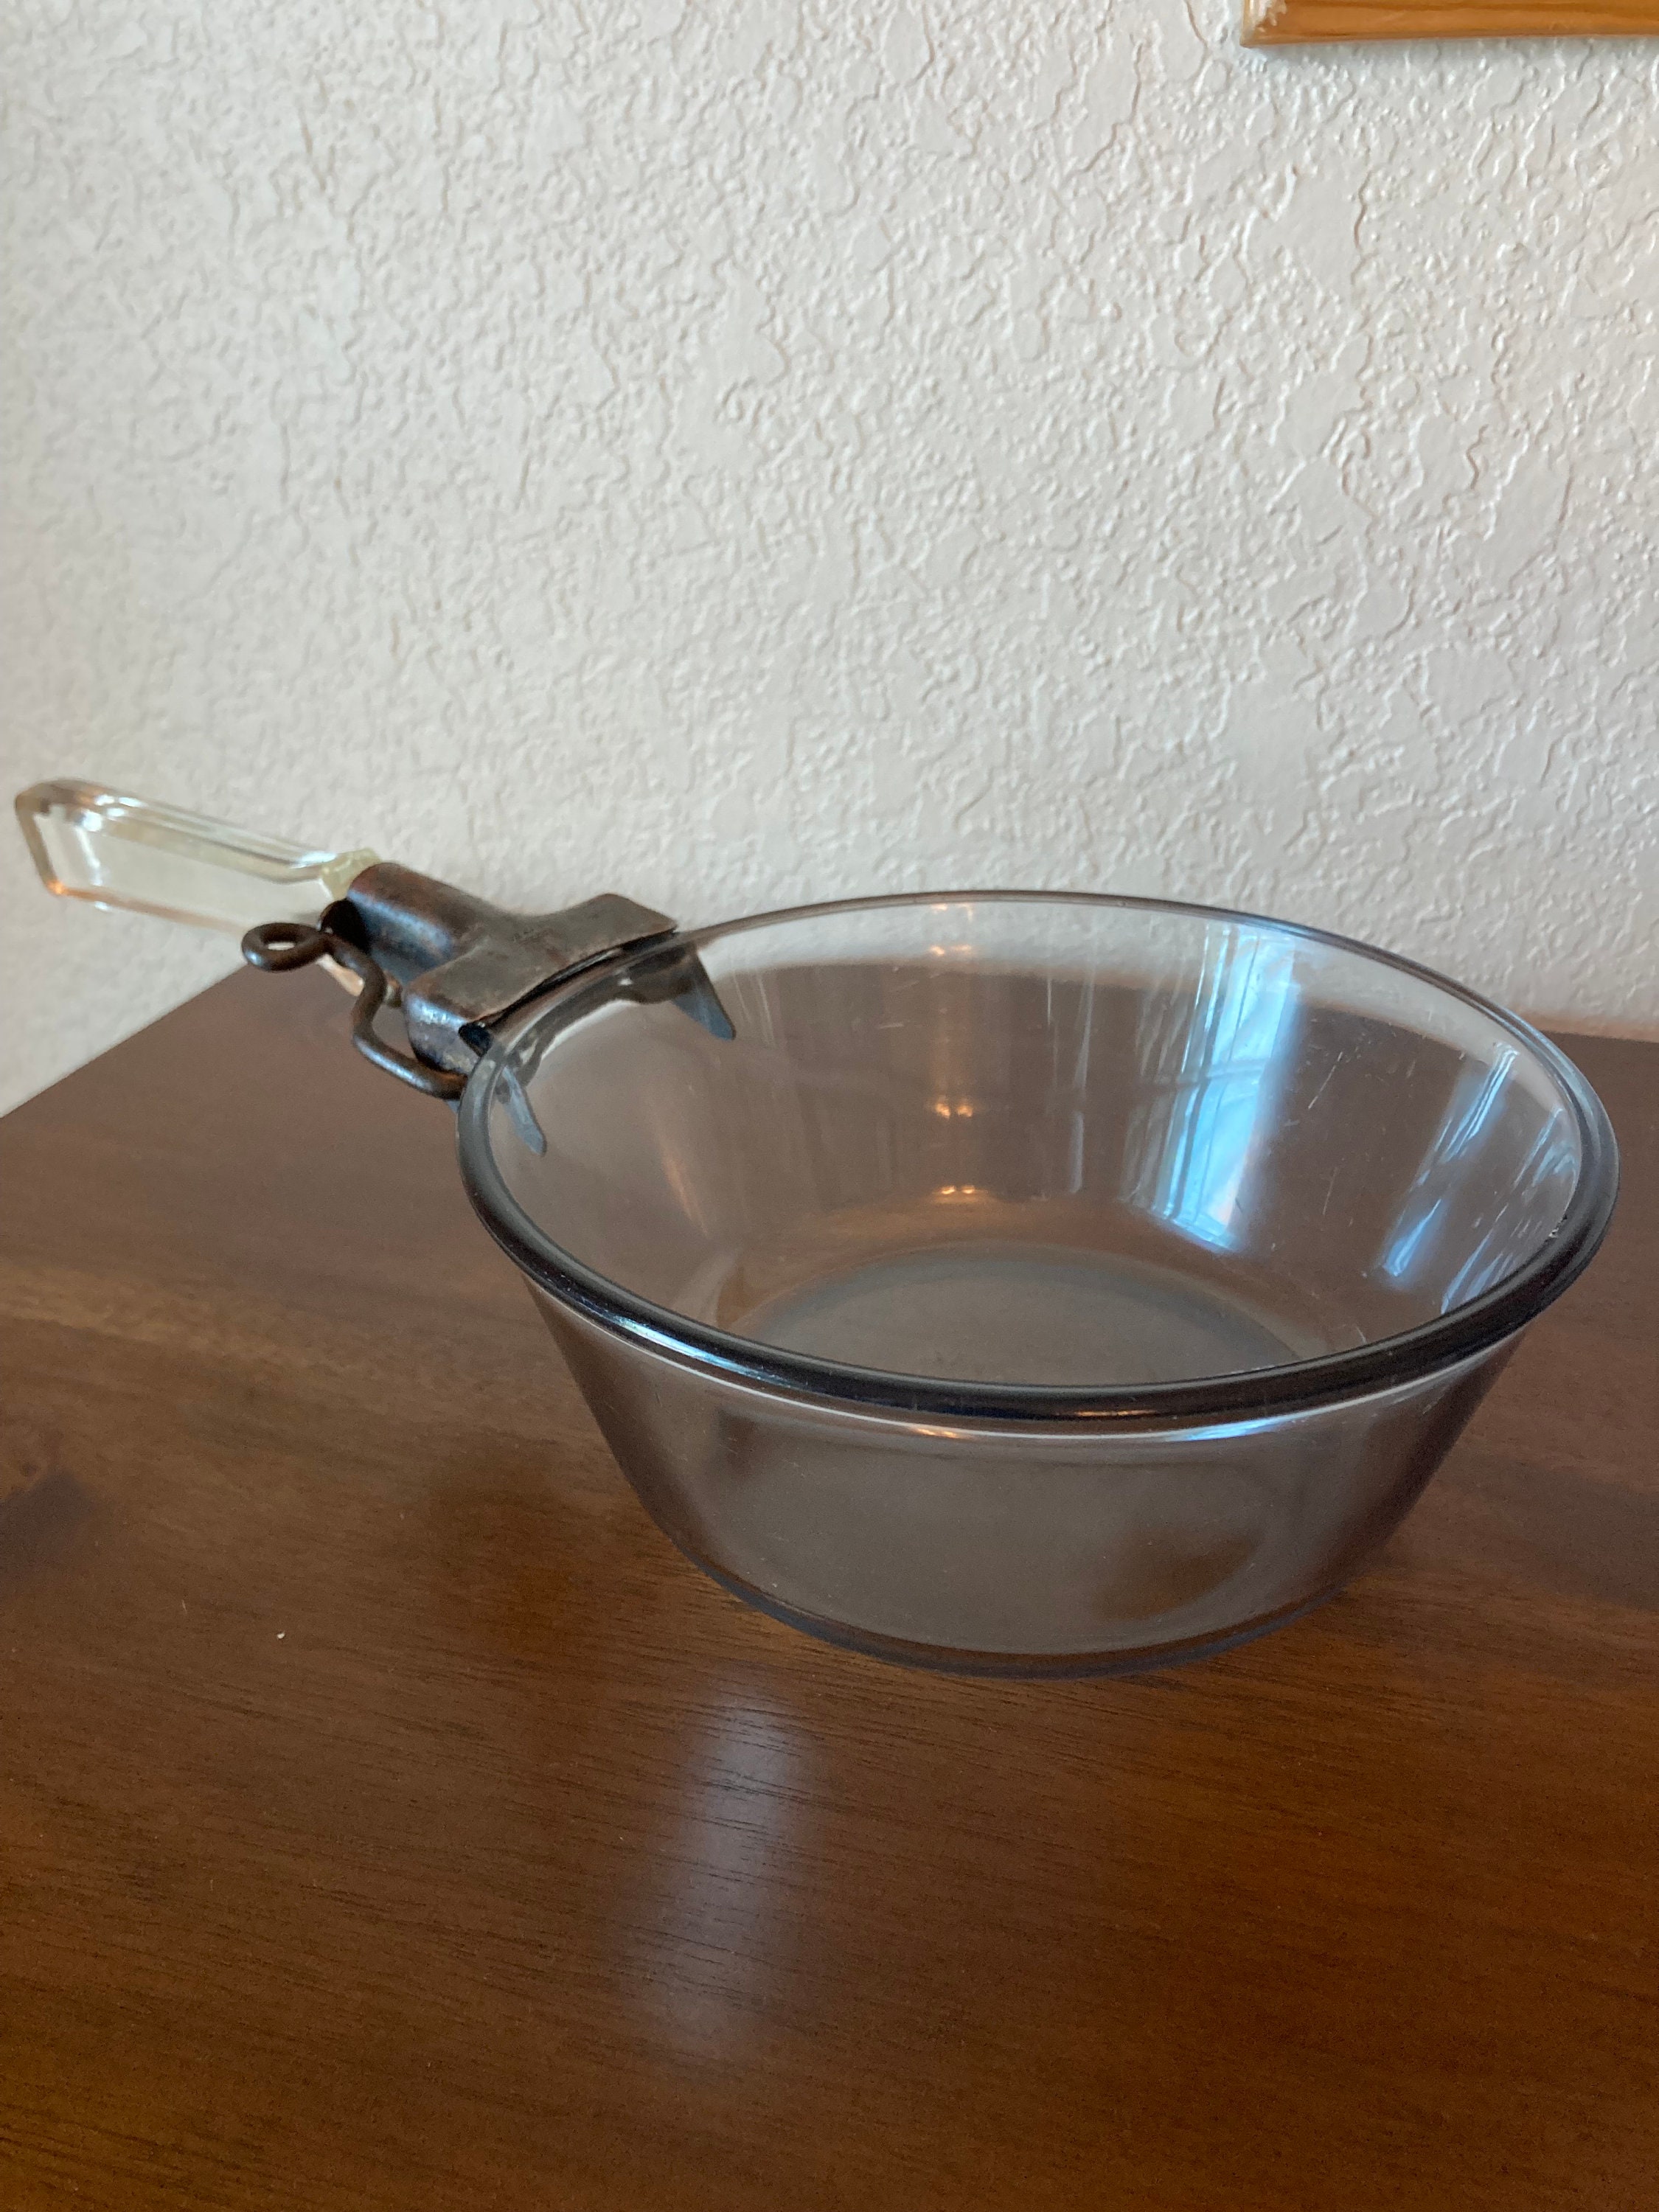 3 Pyrex glass cooking pans with detachable handles